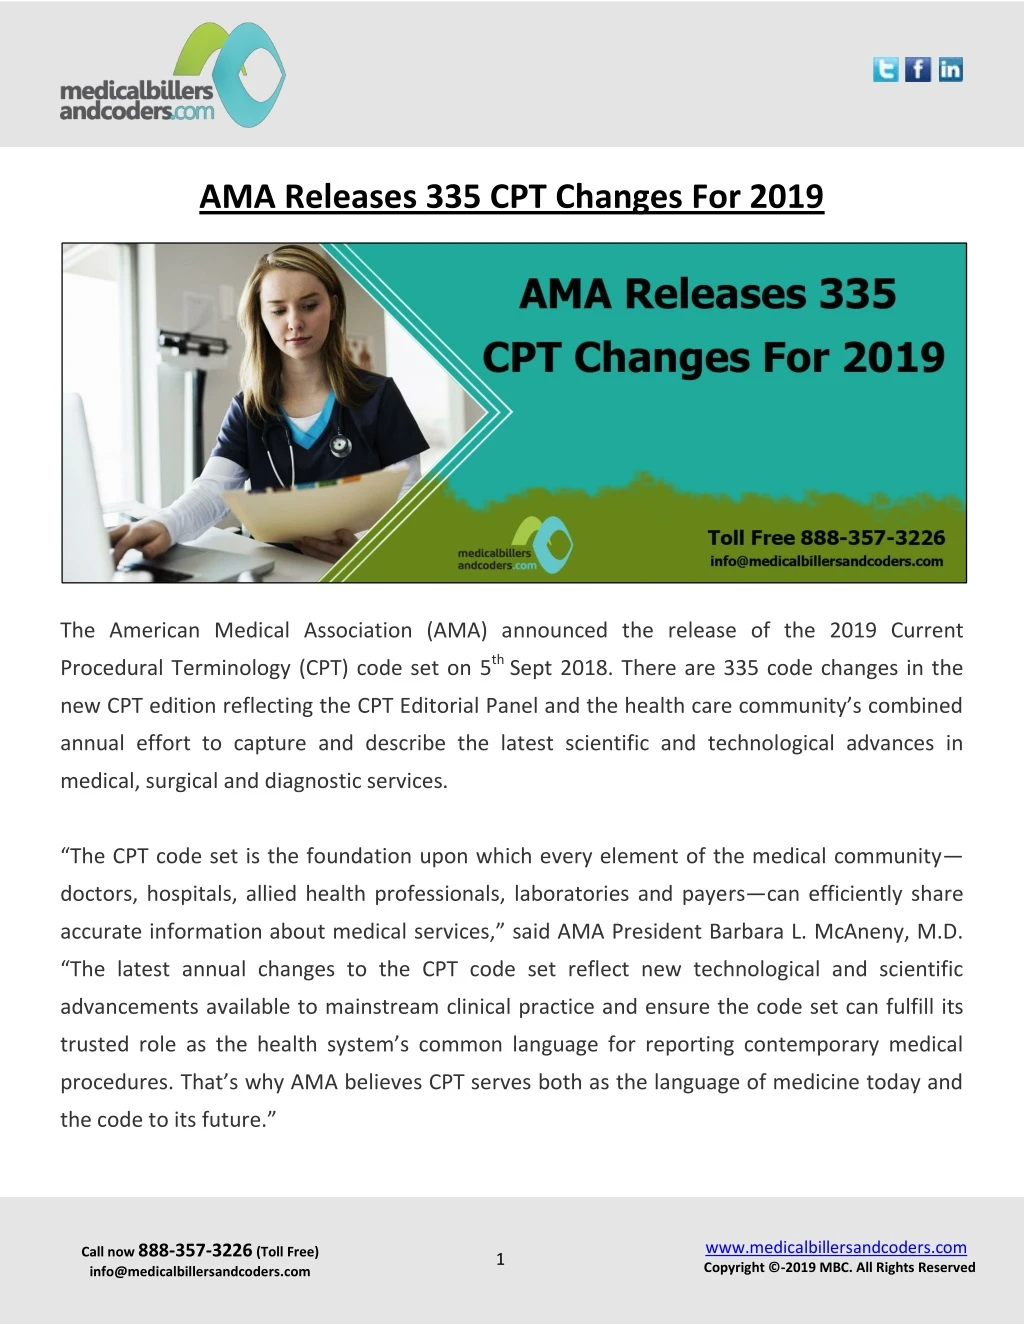 ama releases 335 cpt changes for 2019